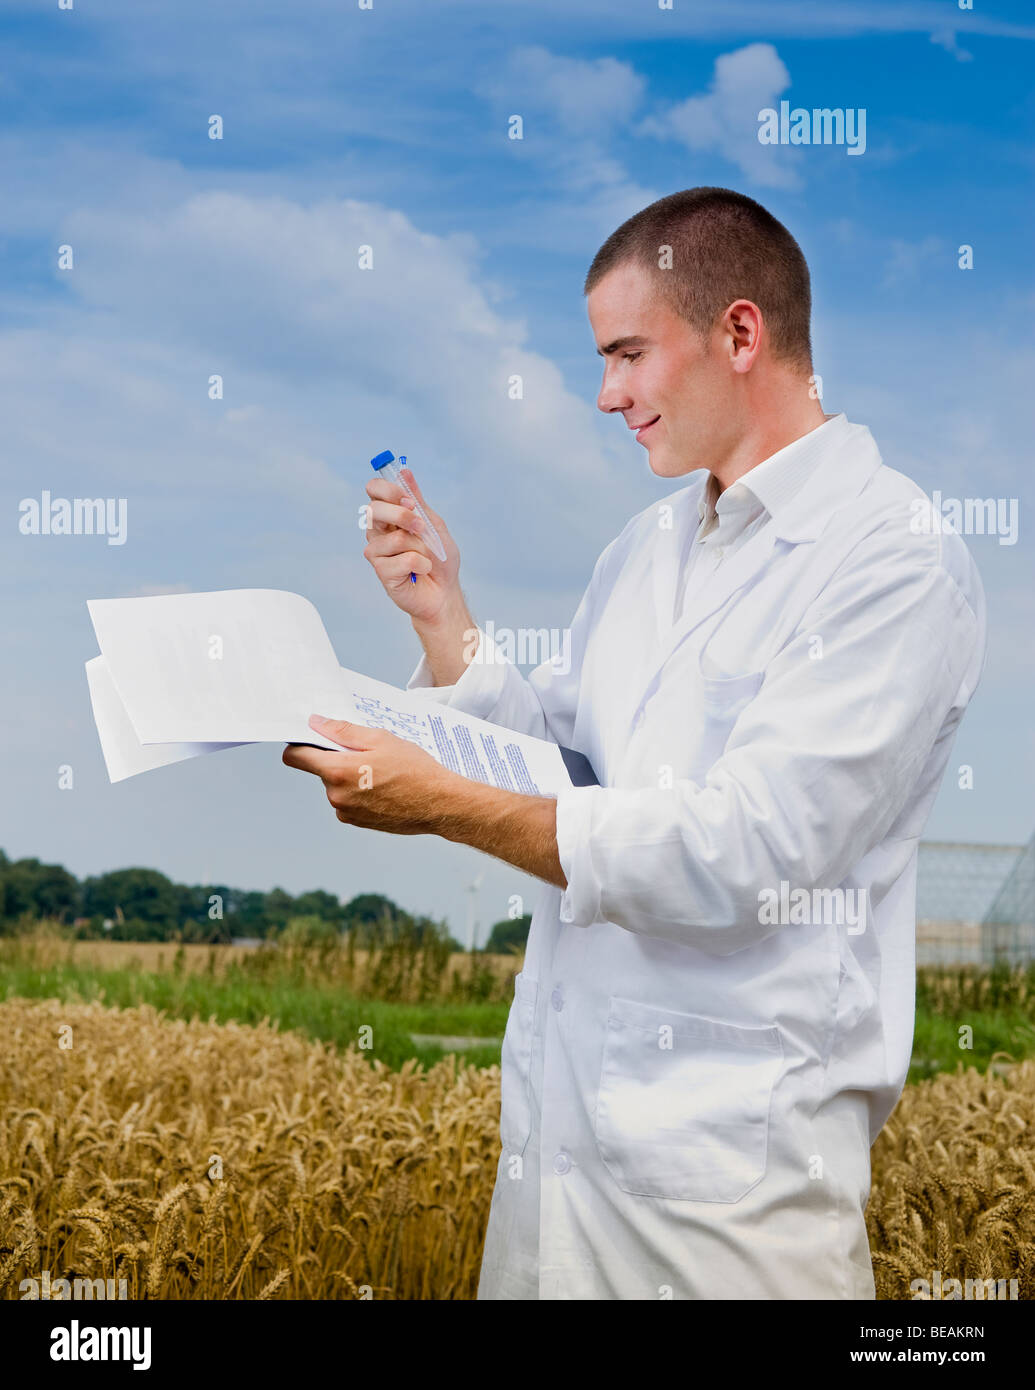 Agriculture scientist making notes in the field with greenhouses in background Stock Photo